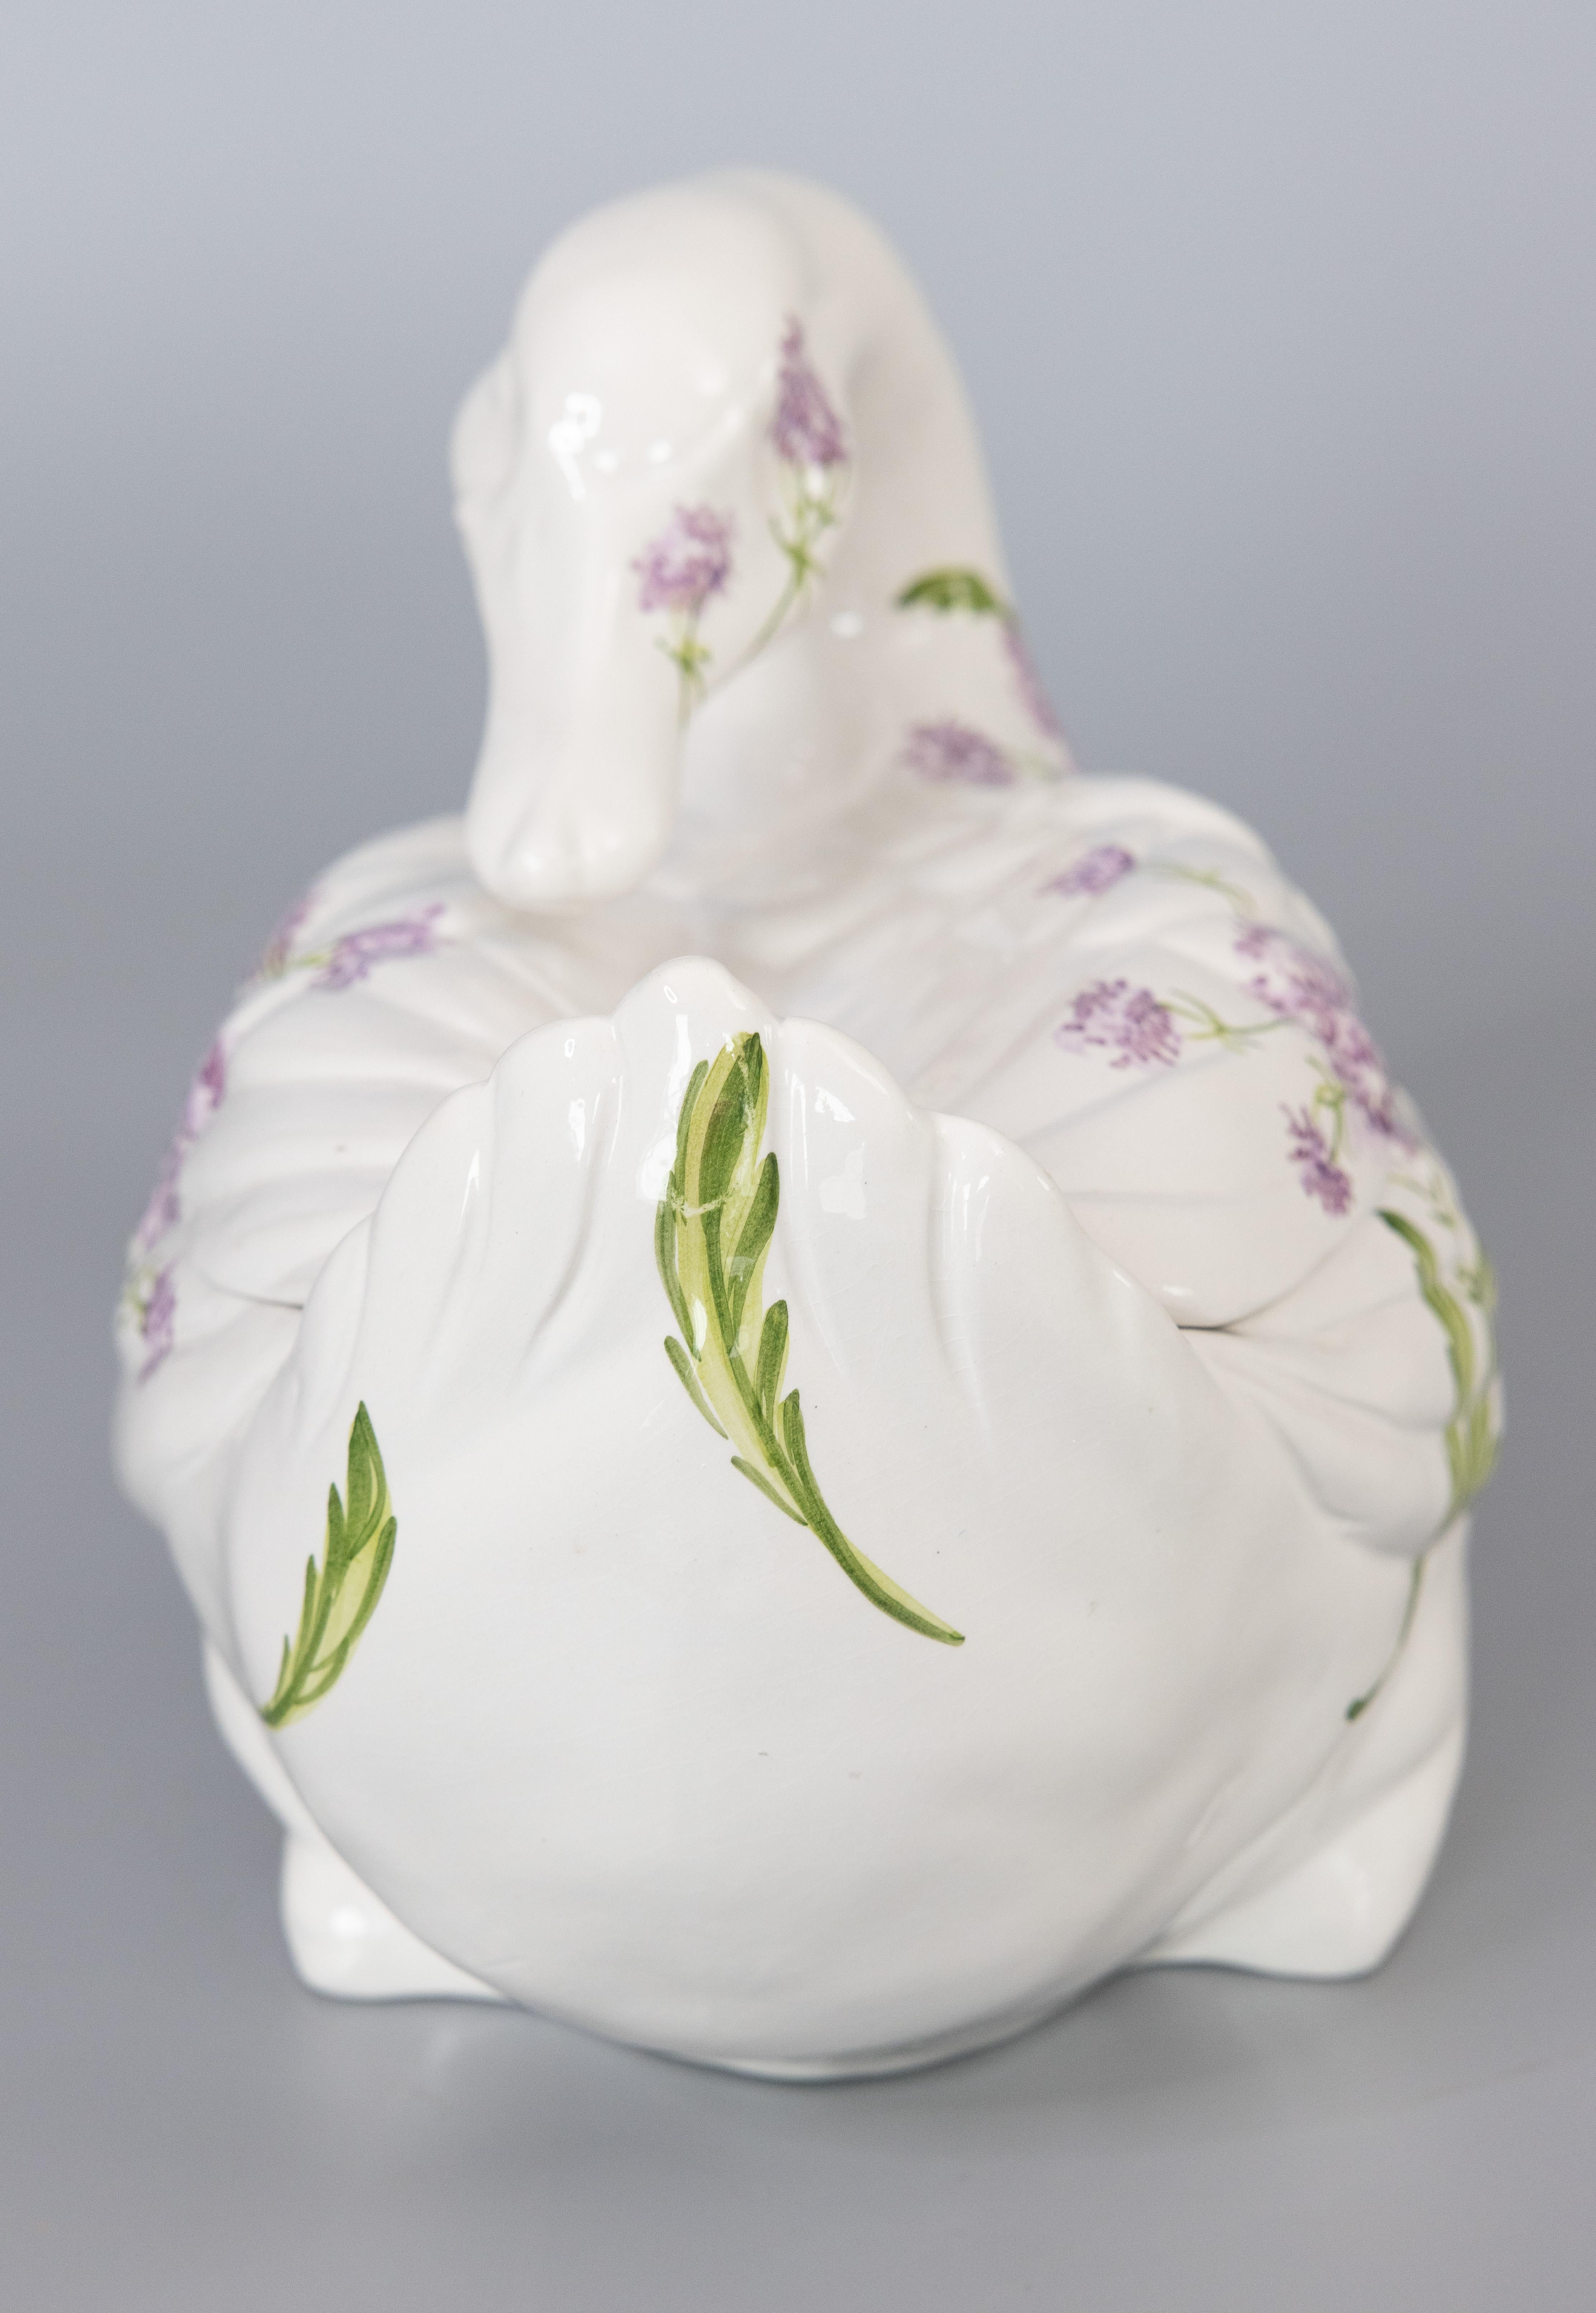 Vintage Italian Ceramic Swan Soup Tureen In Good Condition For Sale In Pearland, TX